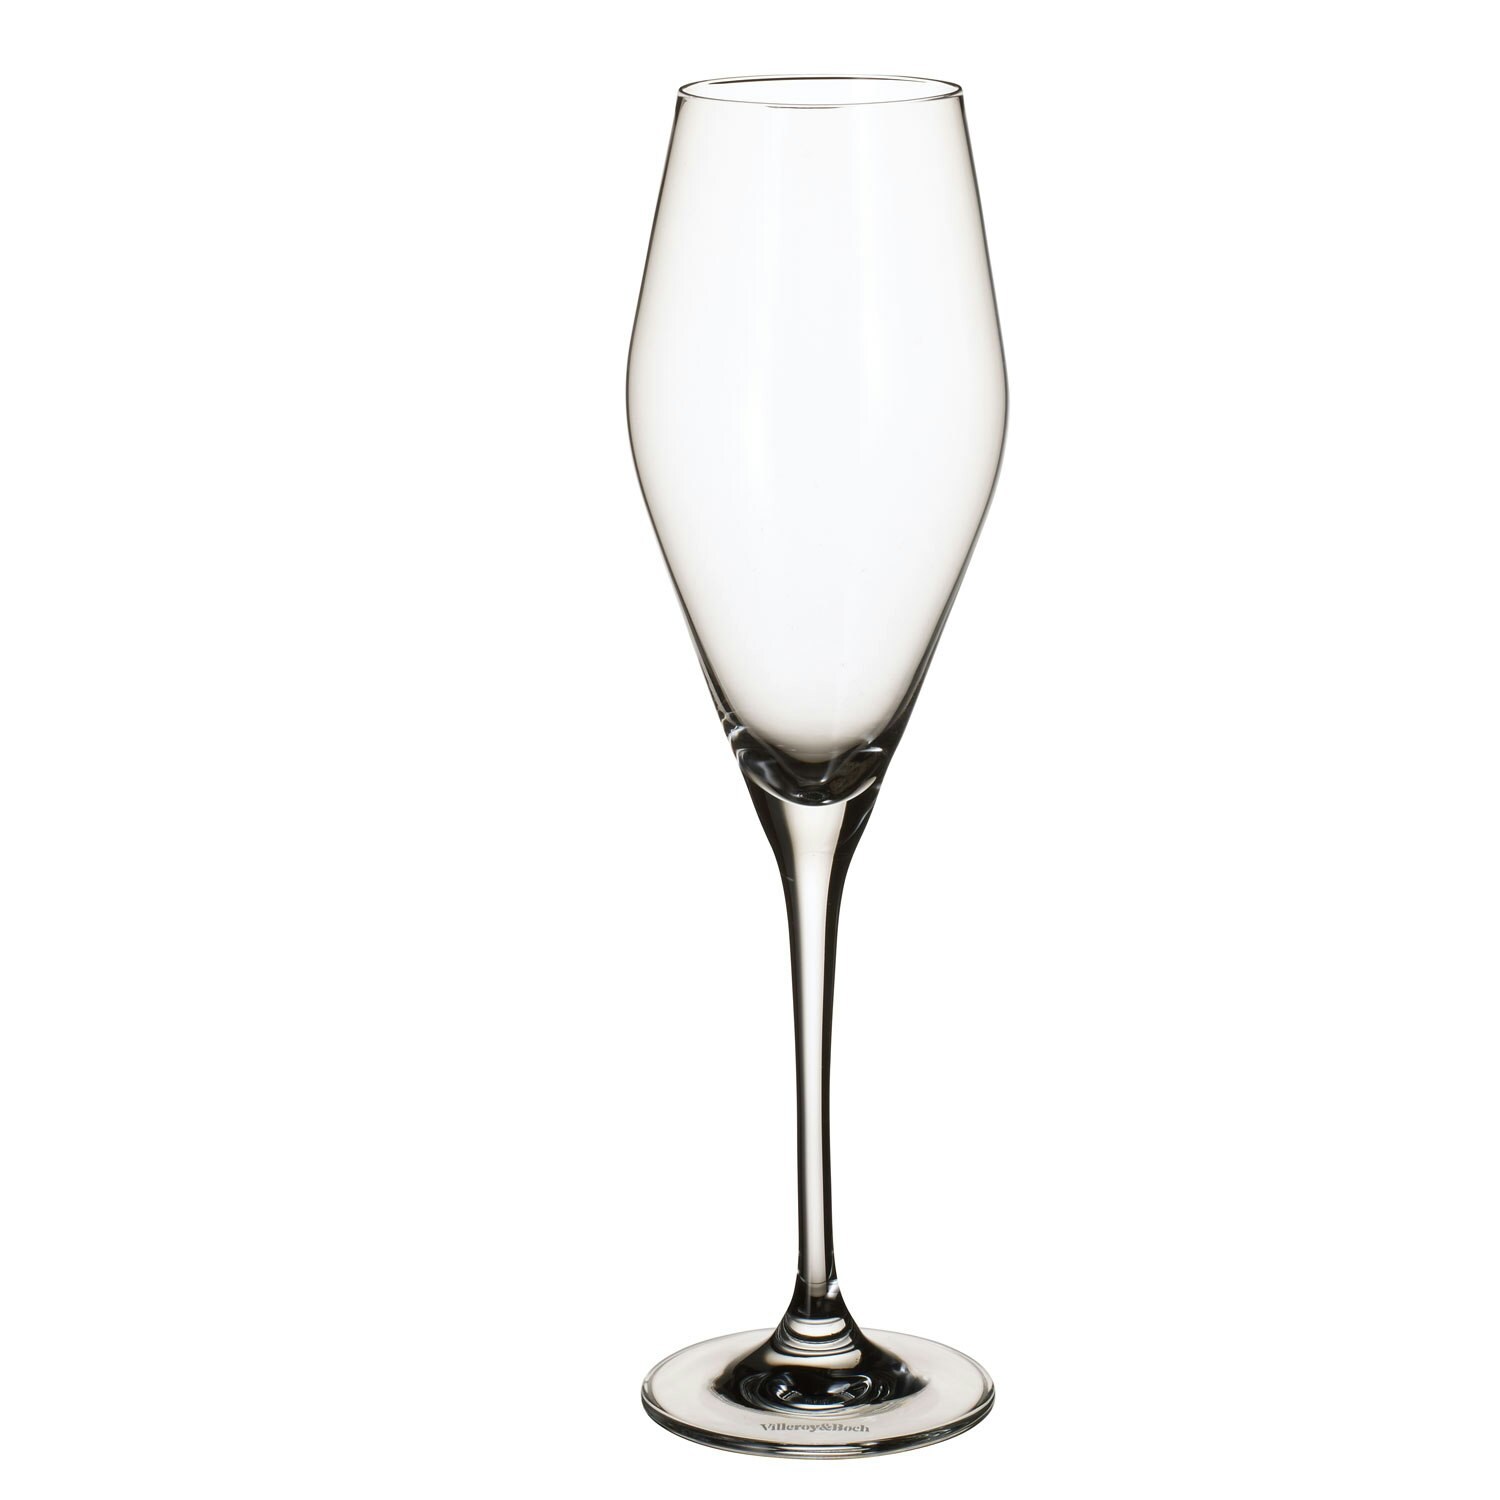 the champagne flutes